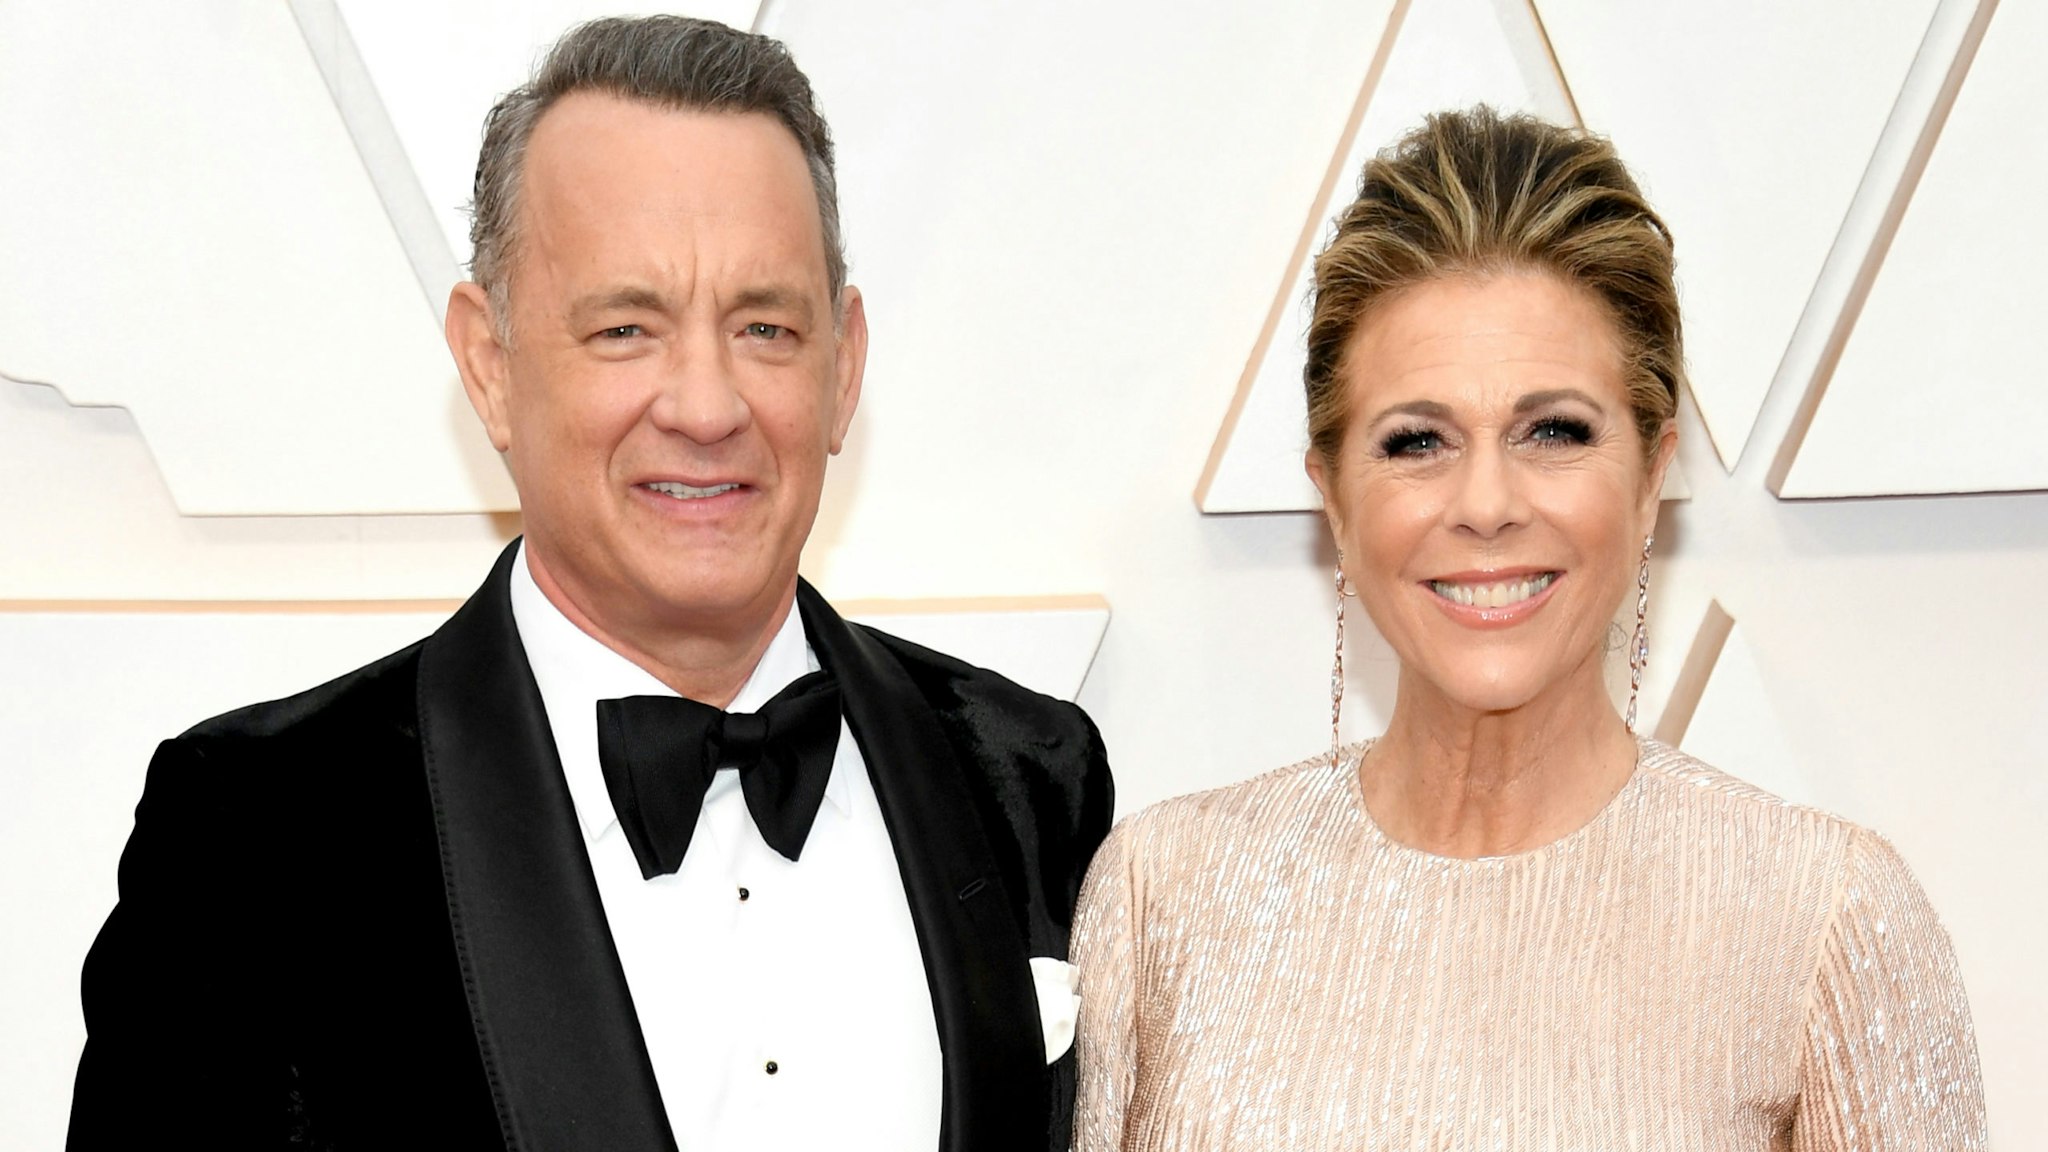 HOLLYWOOD, CALIFORNIA - FEBRUARY 09: (L-R) Tom Hanks and Rita Wilson attend the 92nd Annual Academy Awards at Hollywood and Highland on February 09, 2020 in Hollywood, California.